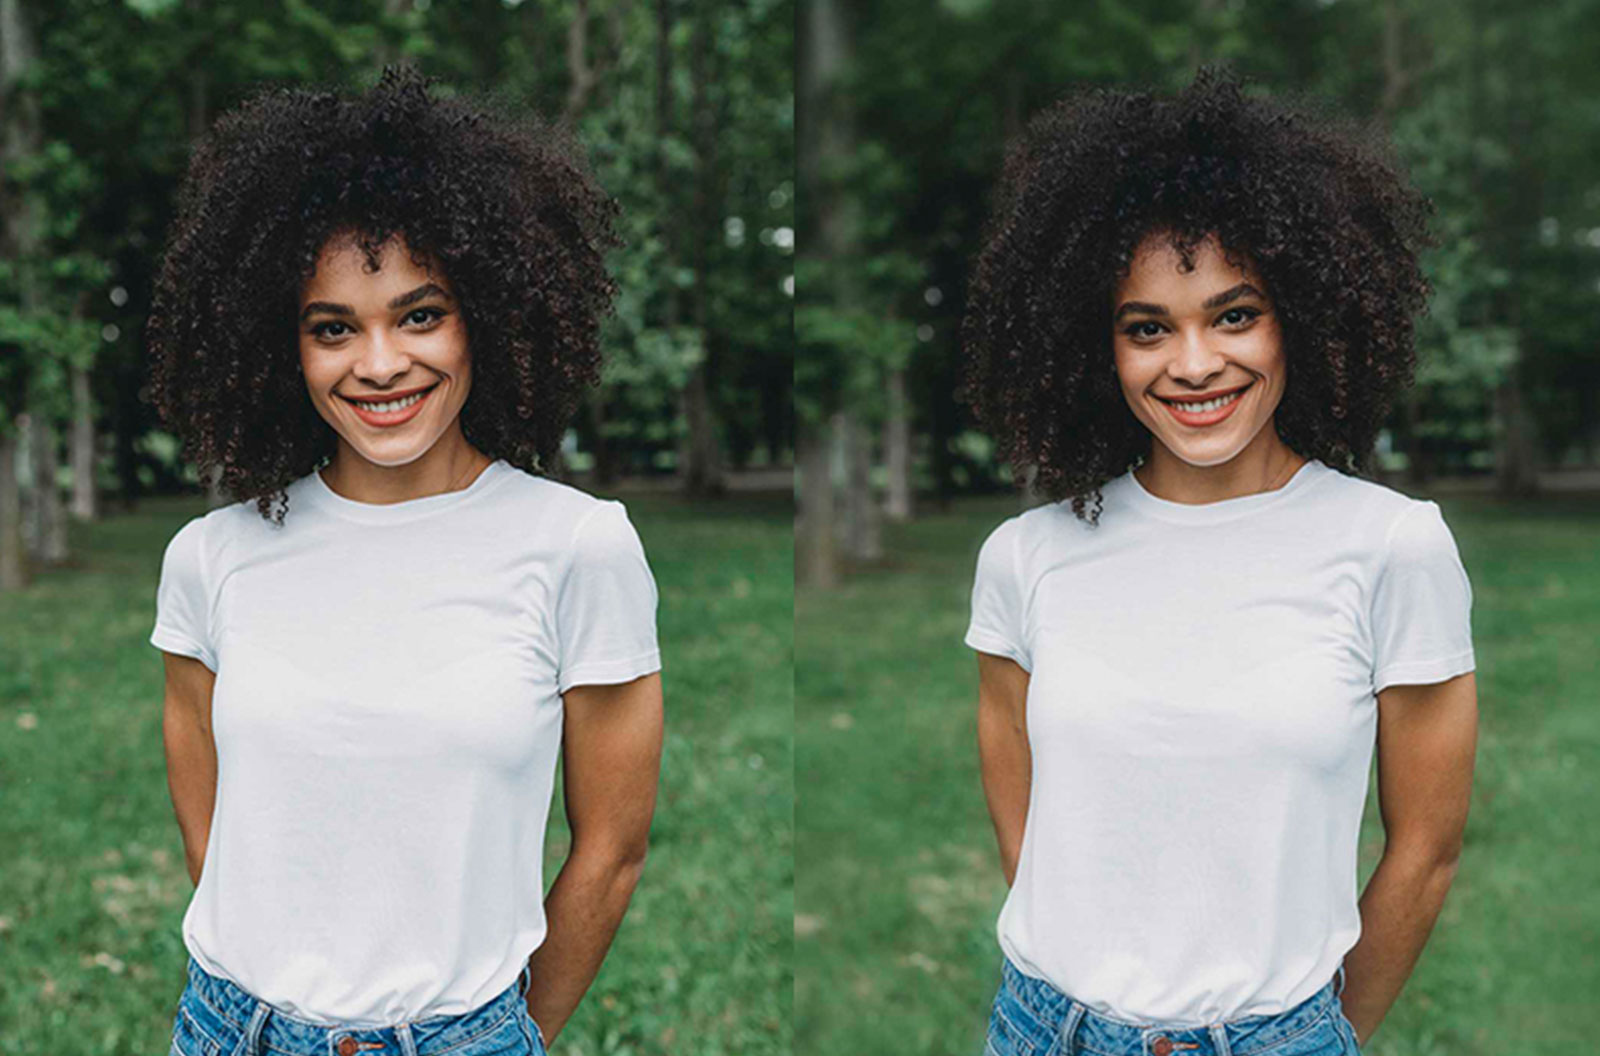 Side by side image comparison of young woman posing to illustrate blur adjustment of an image